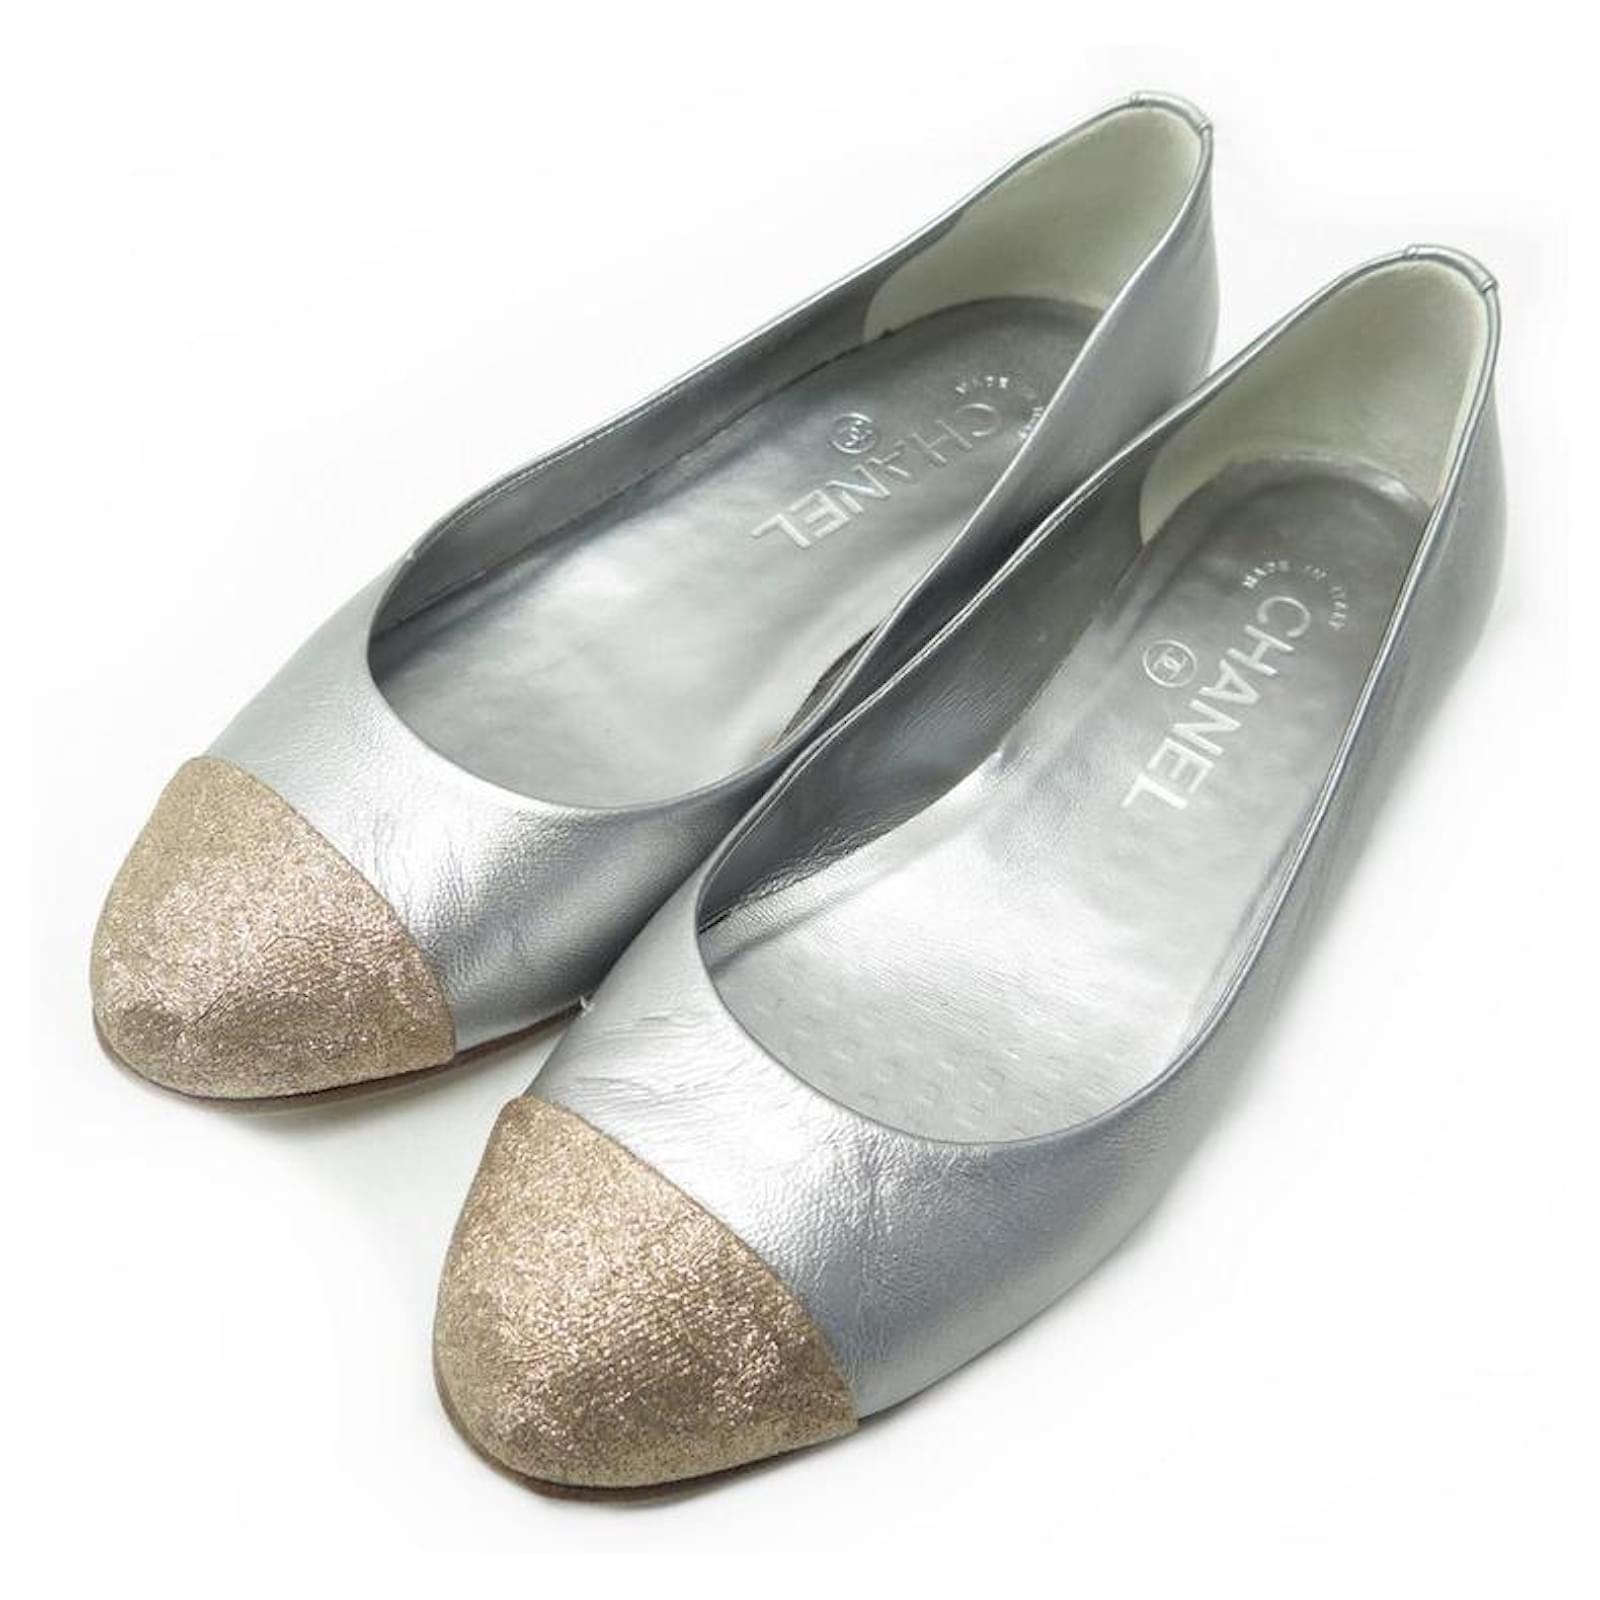 CHANEL SHOES BALLERINAS G23536 36.5 TWO-TONE LEATHER SILVER & GOLD SHOES  Silvery ref.496729 - Joli Closet